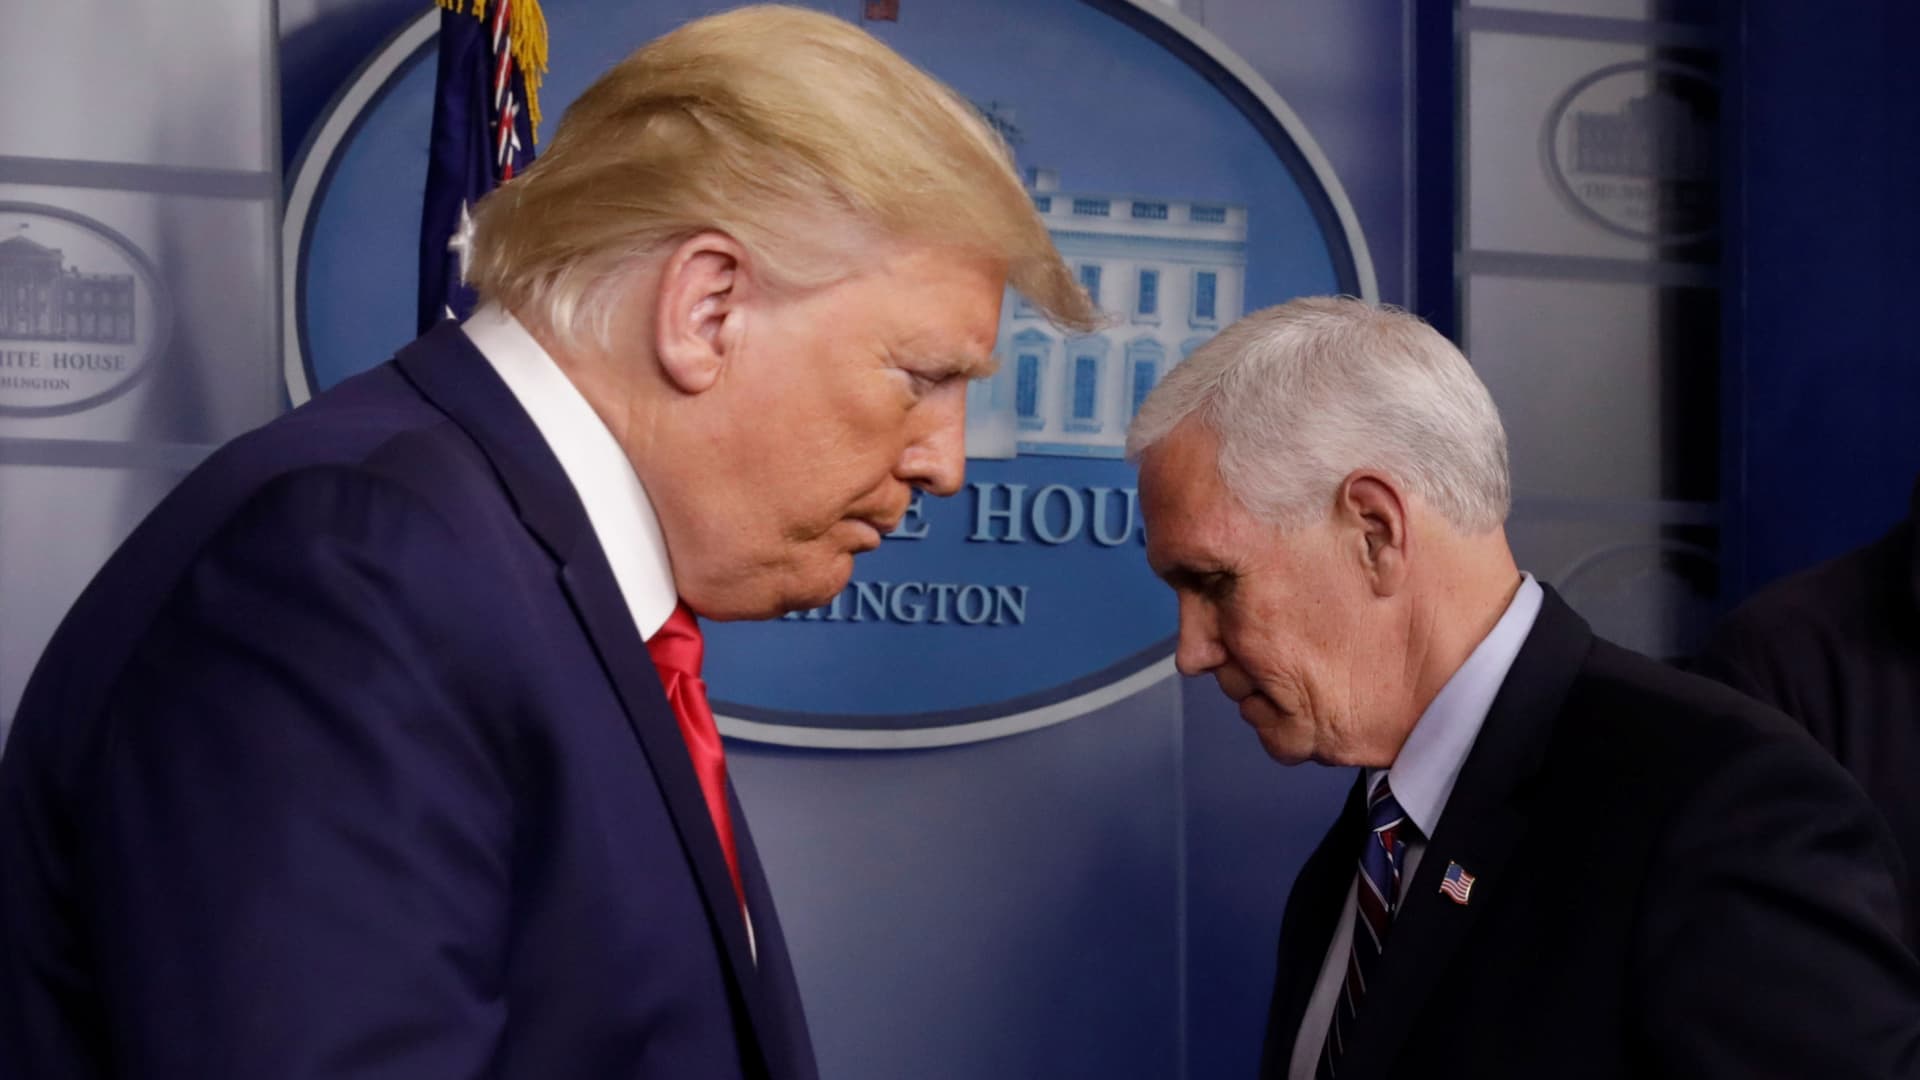 President Donald Trump and U.S. Vice President Mike Pence hold a news conference, amid the coronavirus disease (COVID-19) outbreak, in Washington D.C., March 22, 2020.